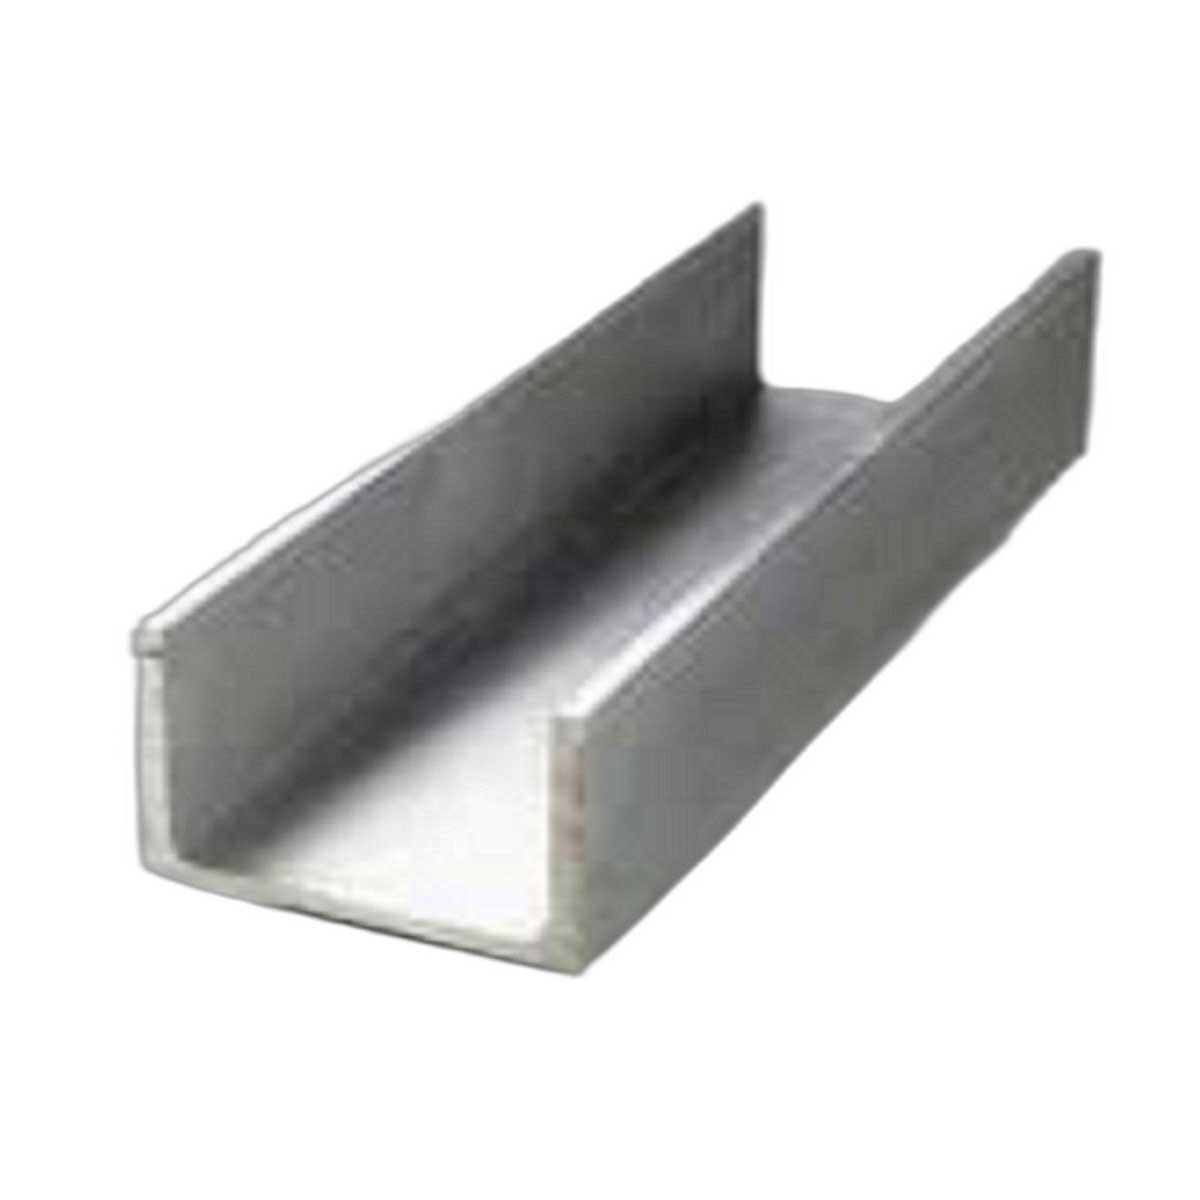 Aluminium U Shaped Channel Manufacturers, Suppliers in Hisar